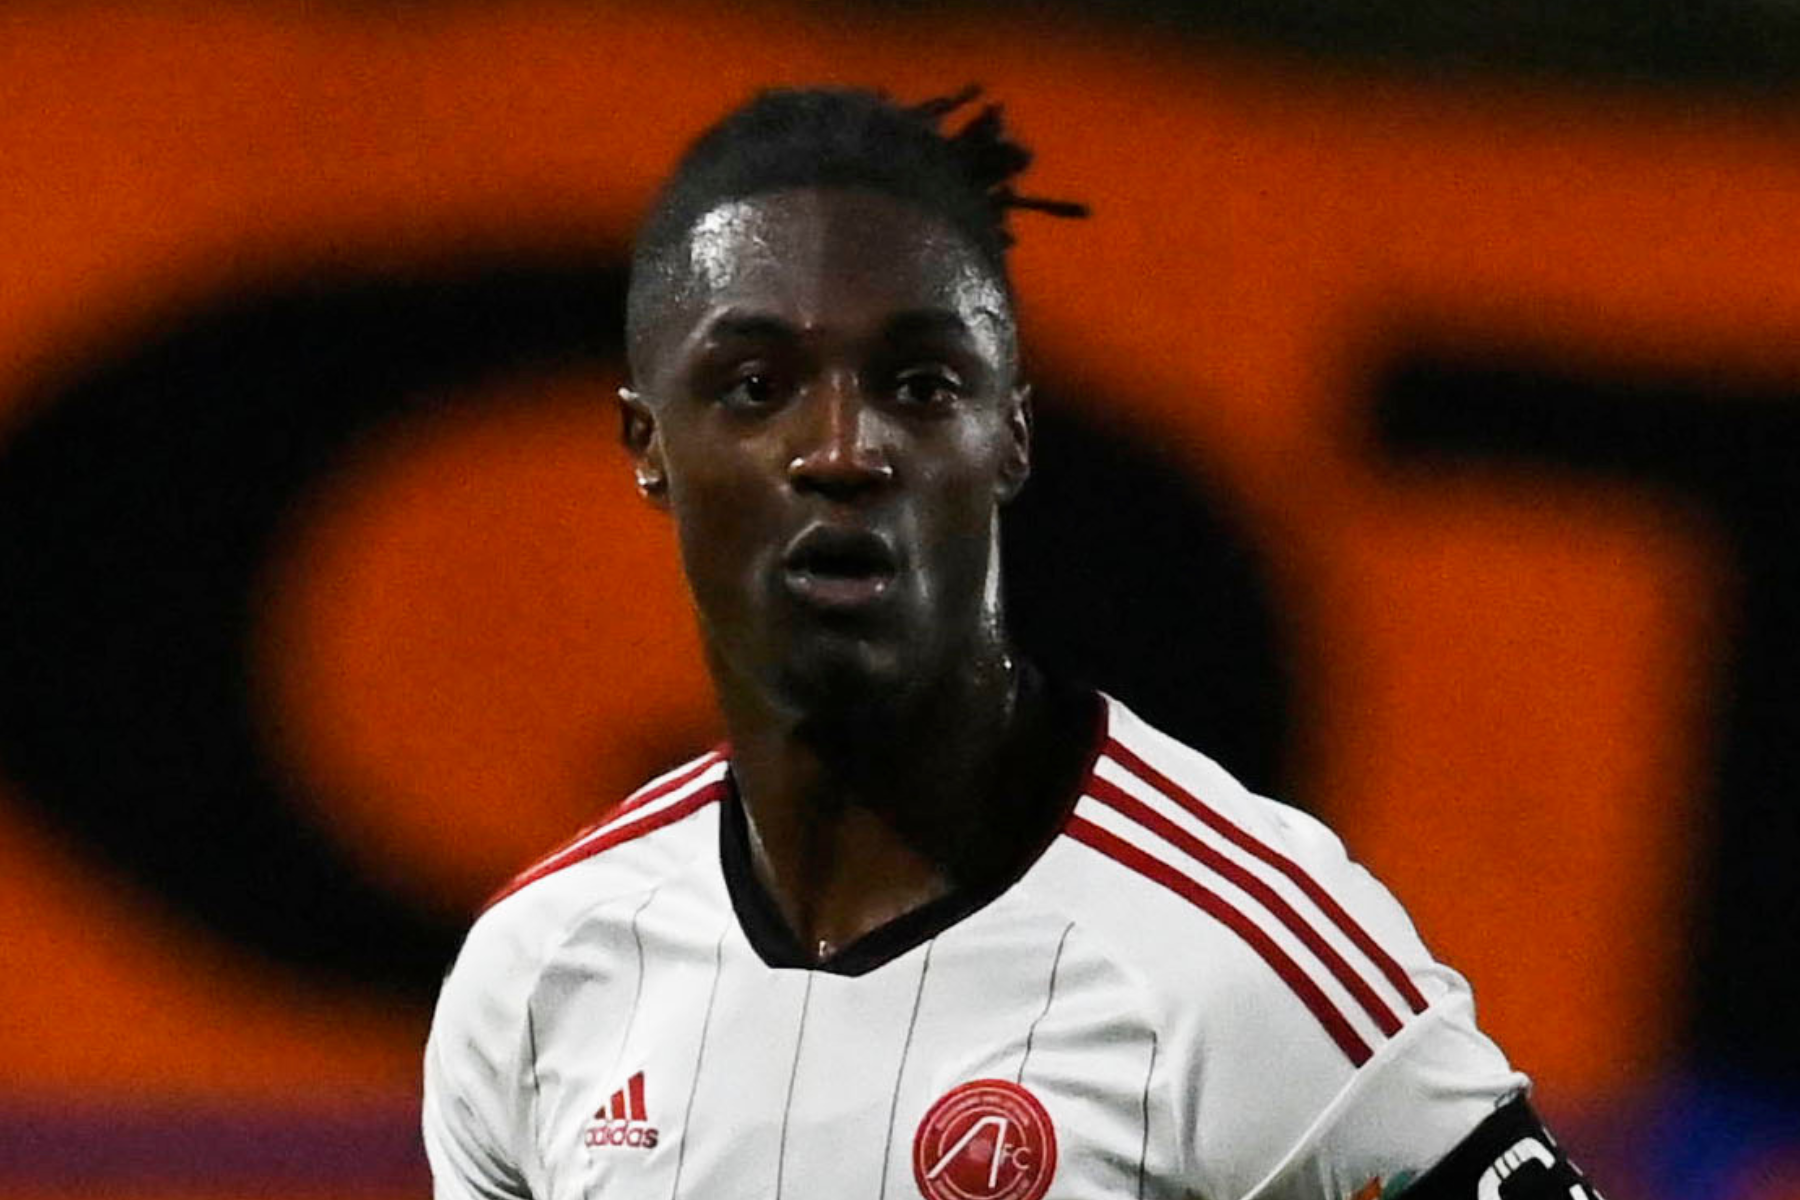 Aberdeen captain Anthony Stewart joins MK Dons on loan